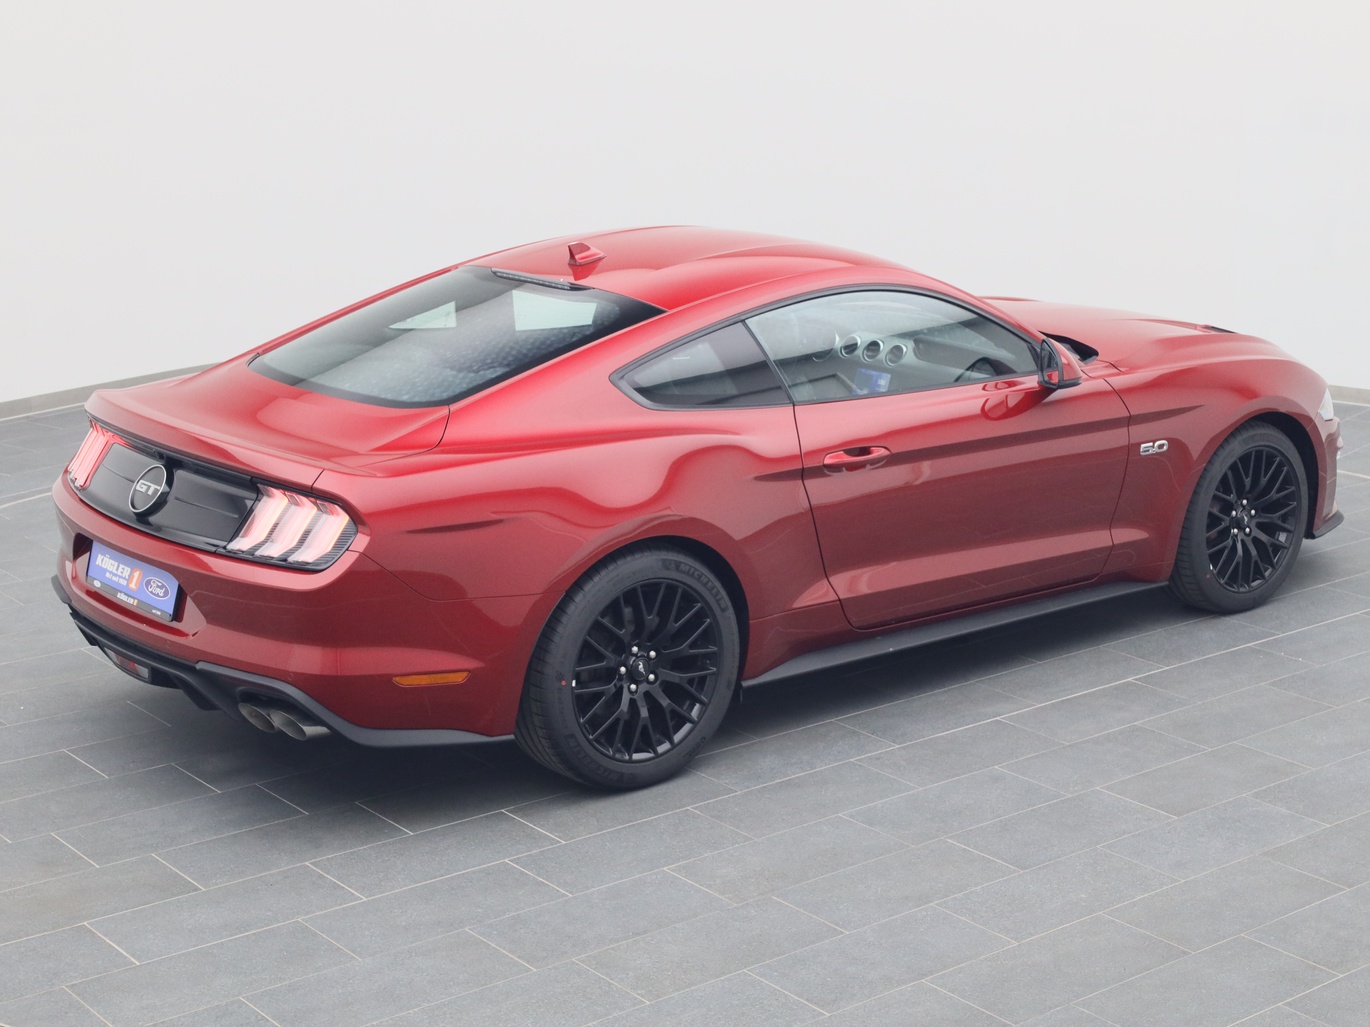  Ford Mustang GT Coupé V8 450PS / Premium 2 / B&O in Lucid Rot 